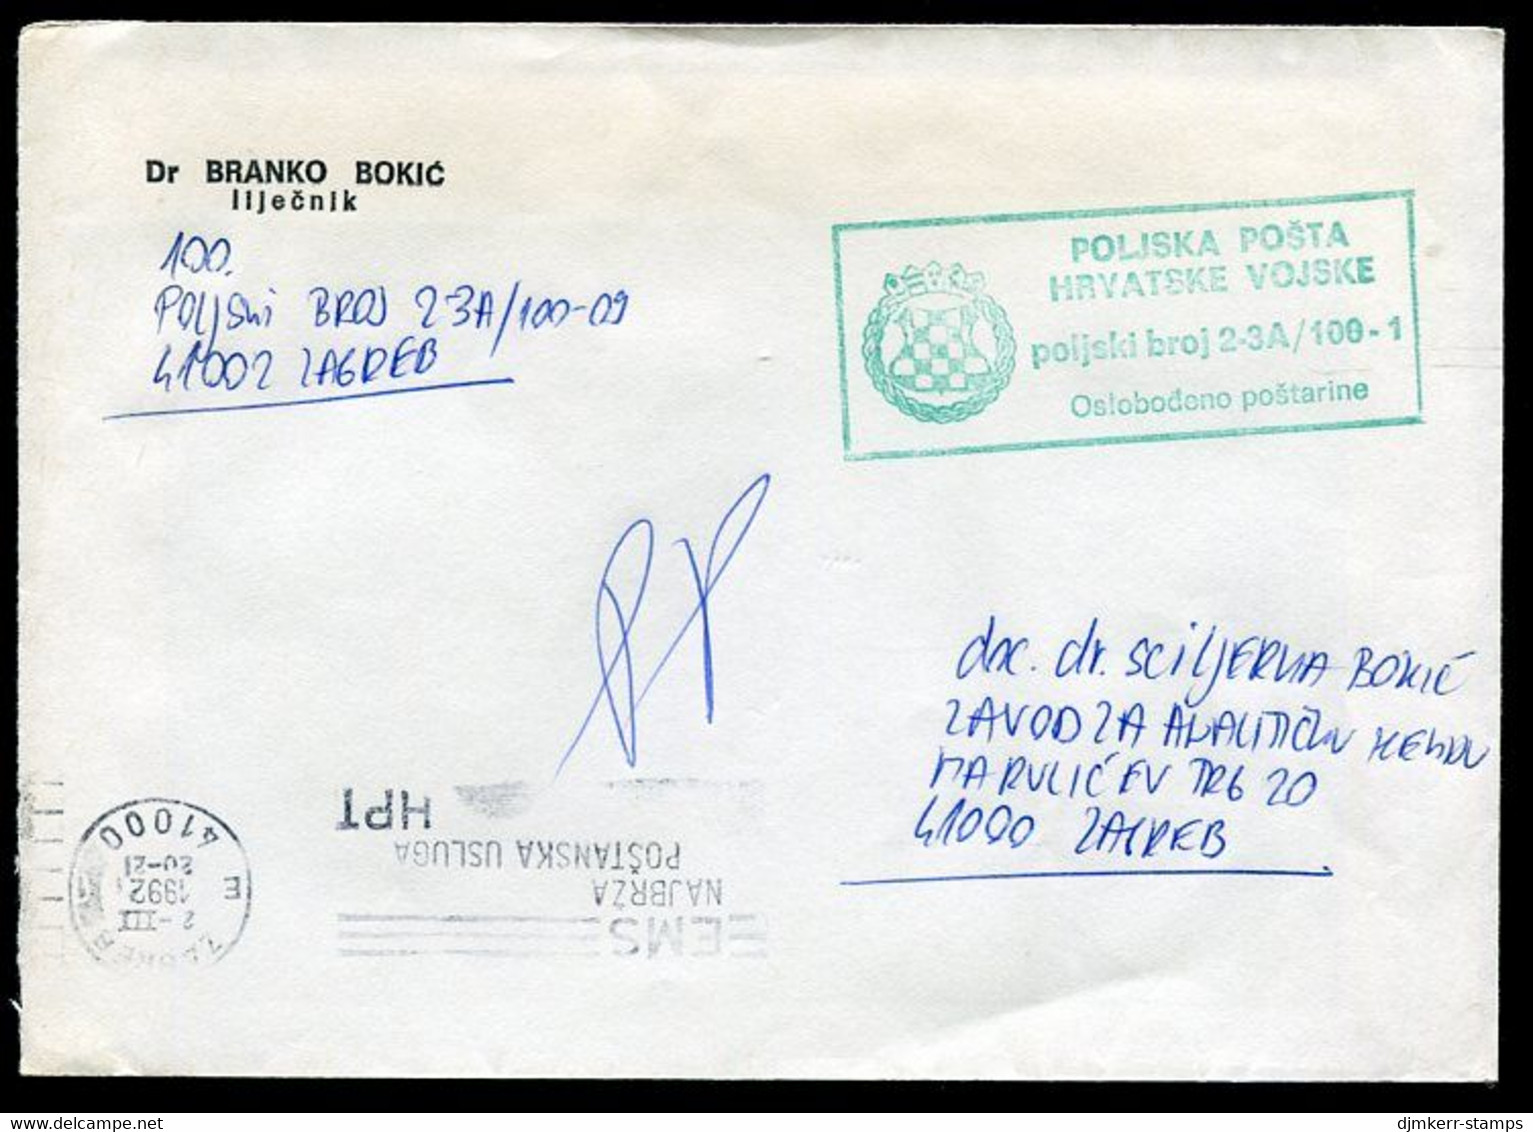 CROATIA 1992 Stampless Cover With Field Post Office Cachet Sent During War With Serbia. - Croacia